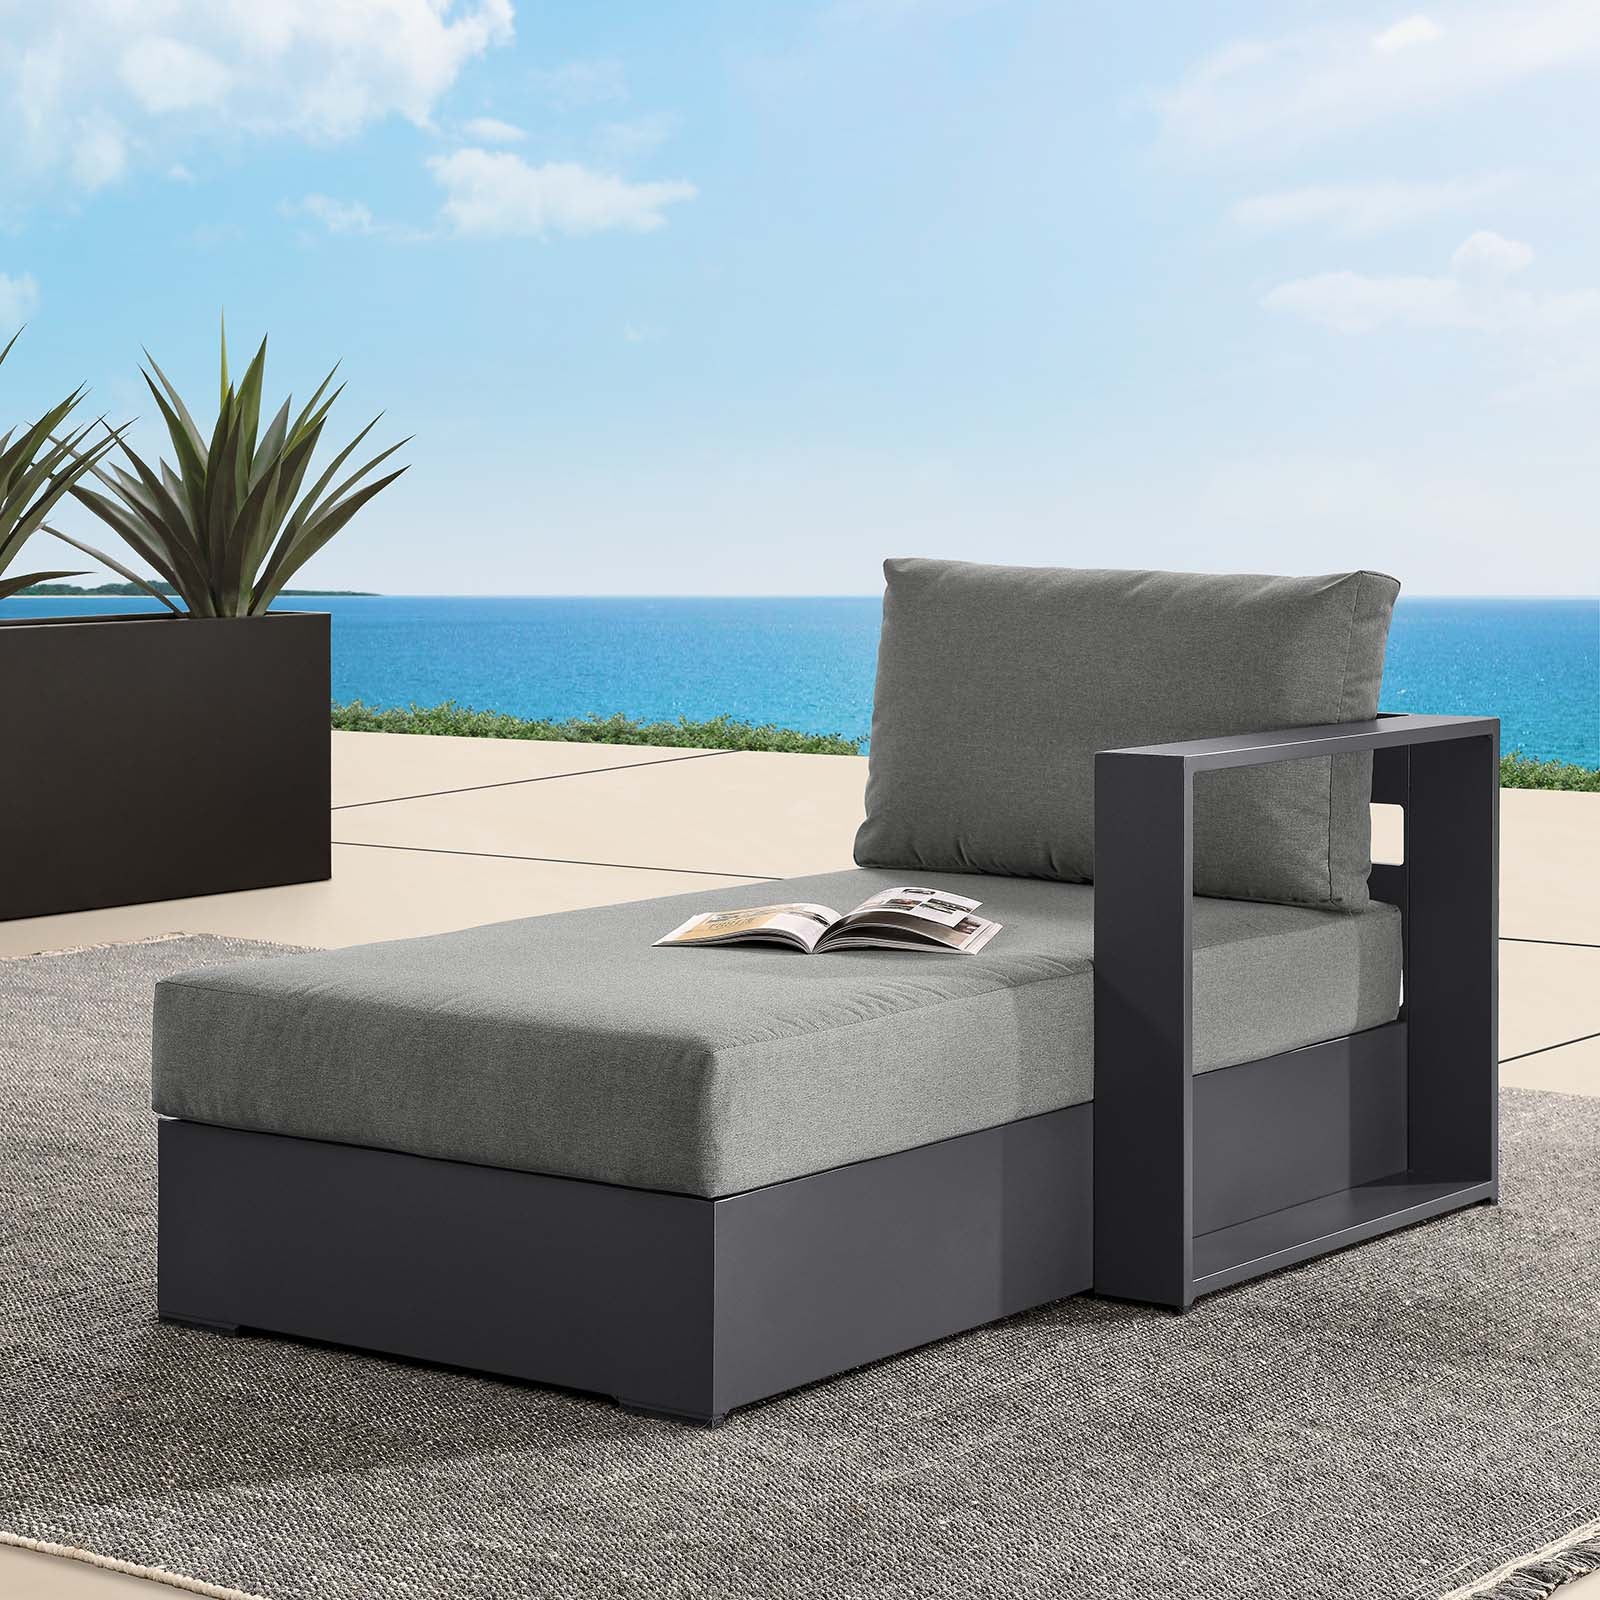 Tahoe Outdoor Patio Powder-Coated Aluminum Modular Right-Facing Chaise Lounge